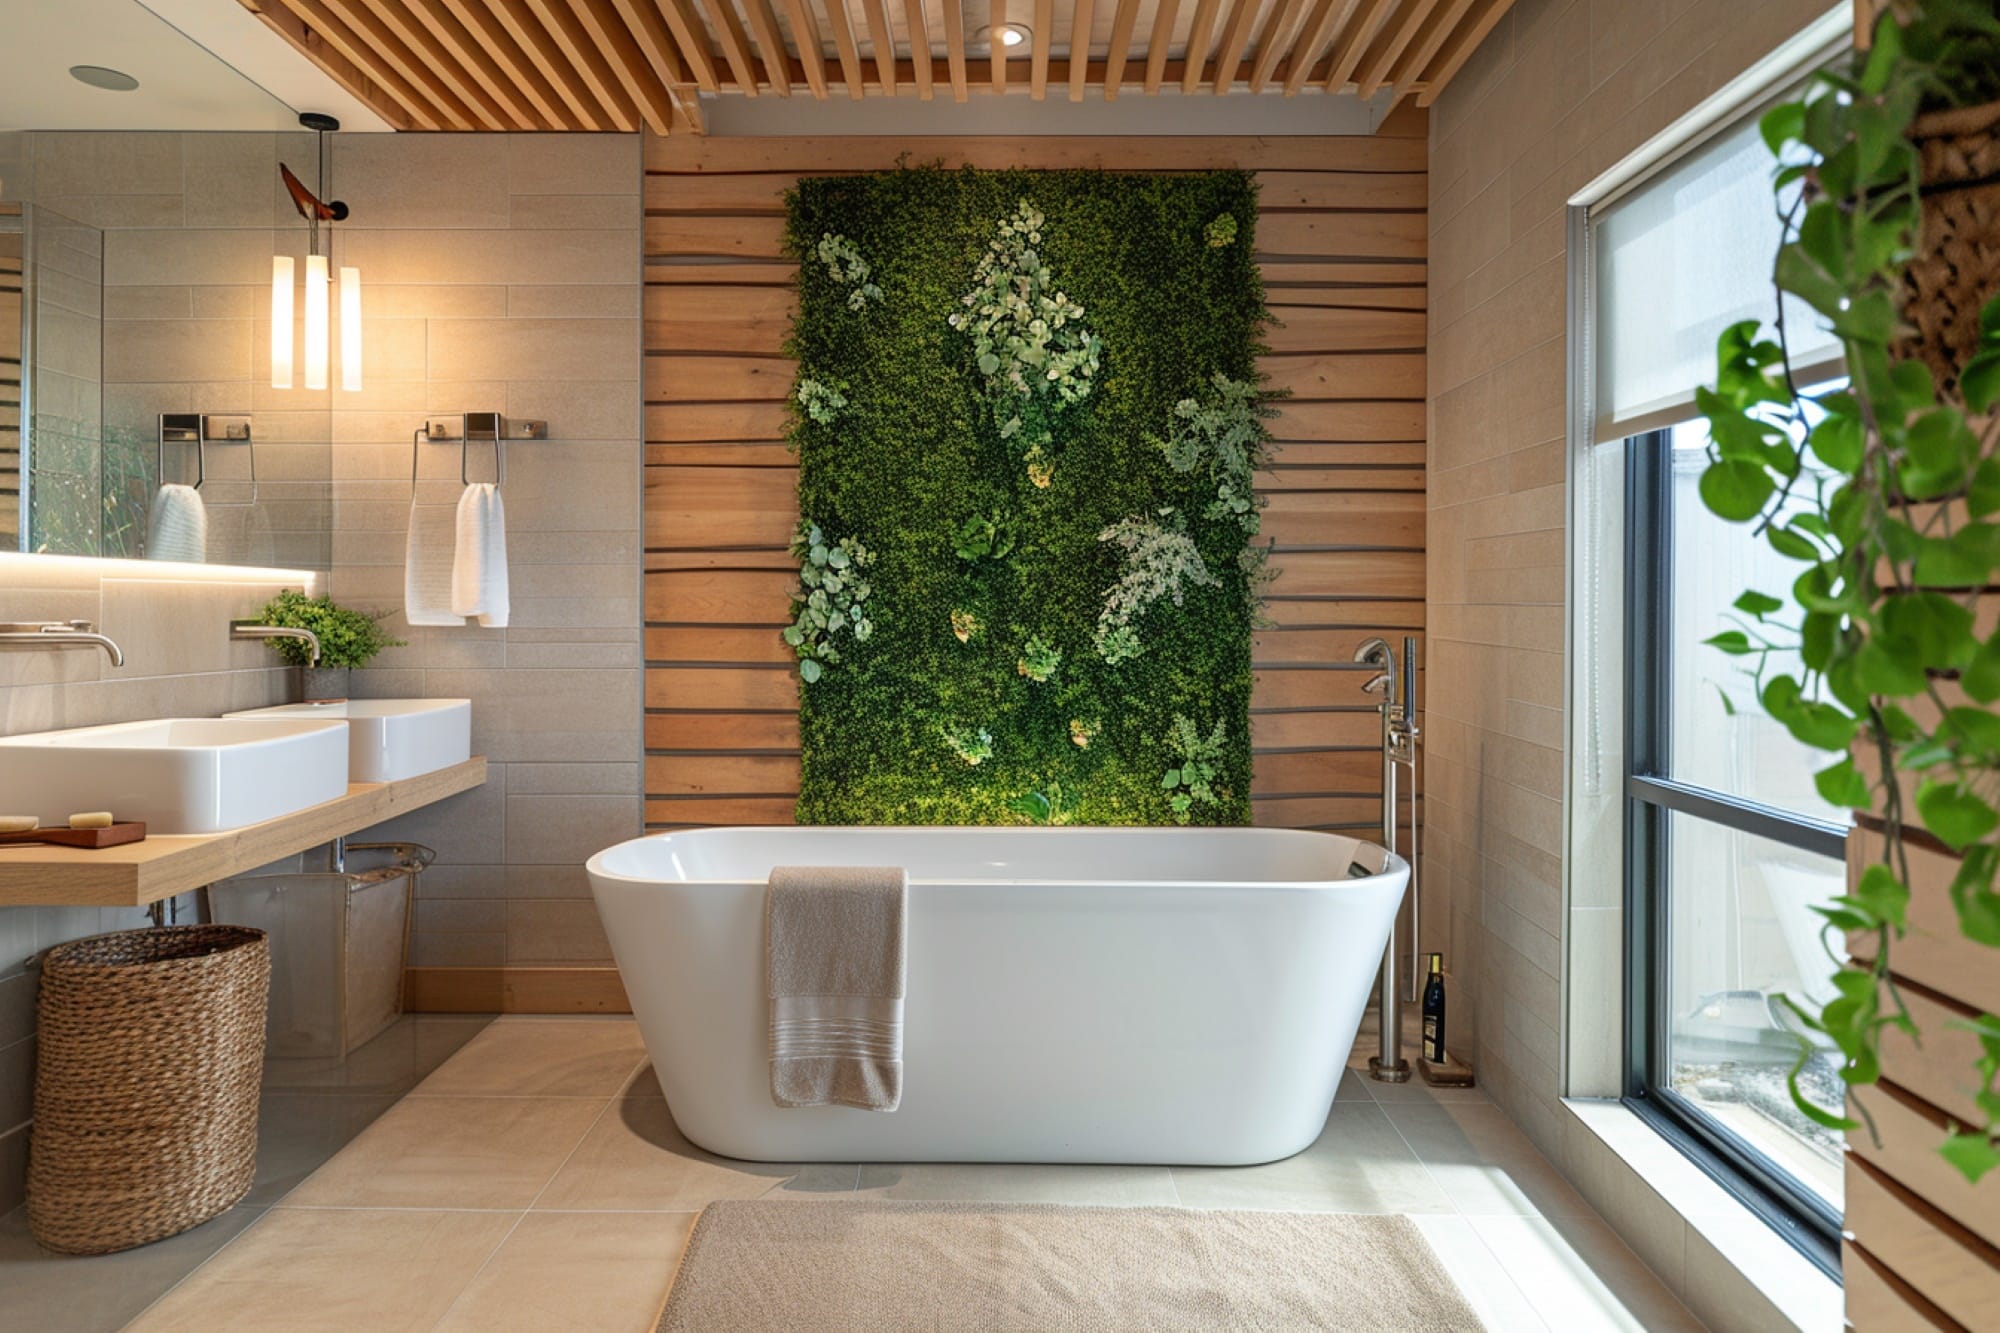 Before & After: Lush Modern Tropical Bathroom